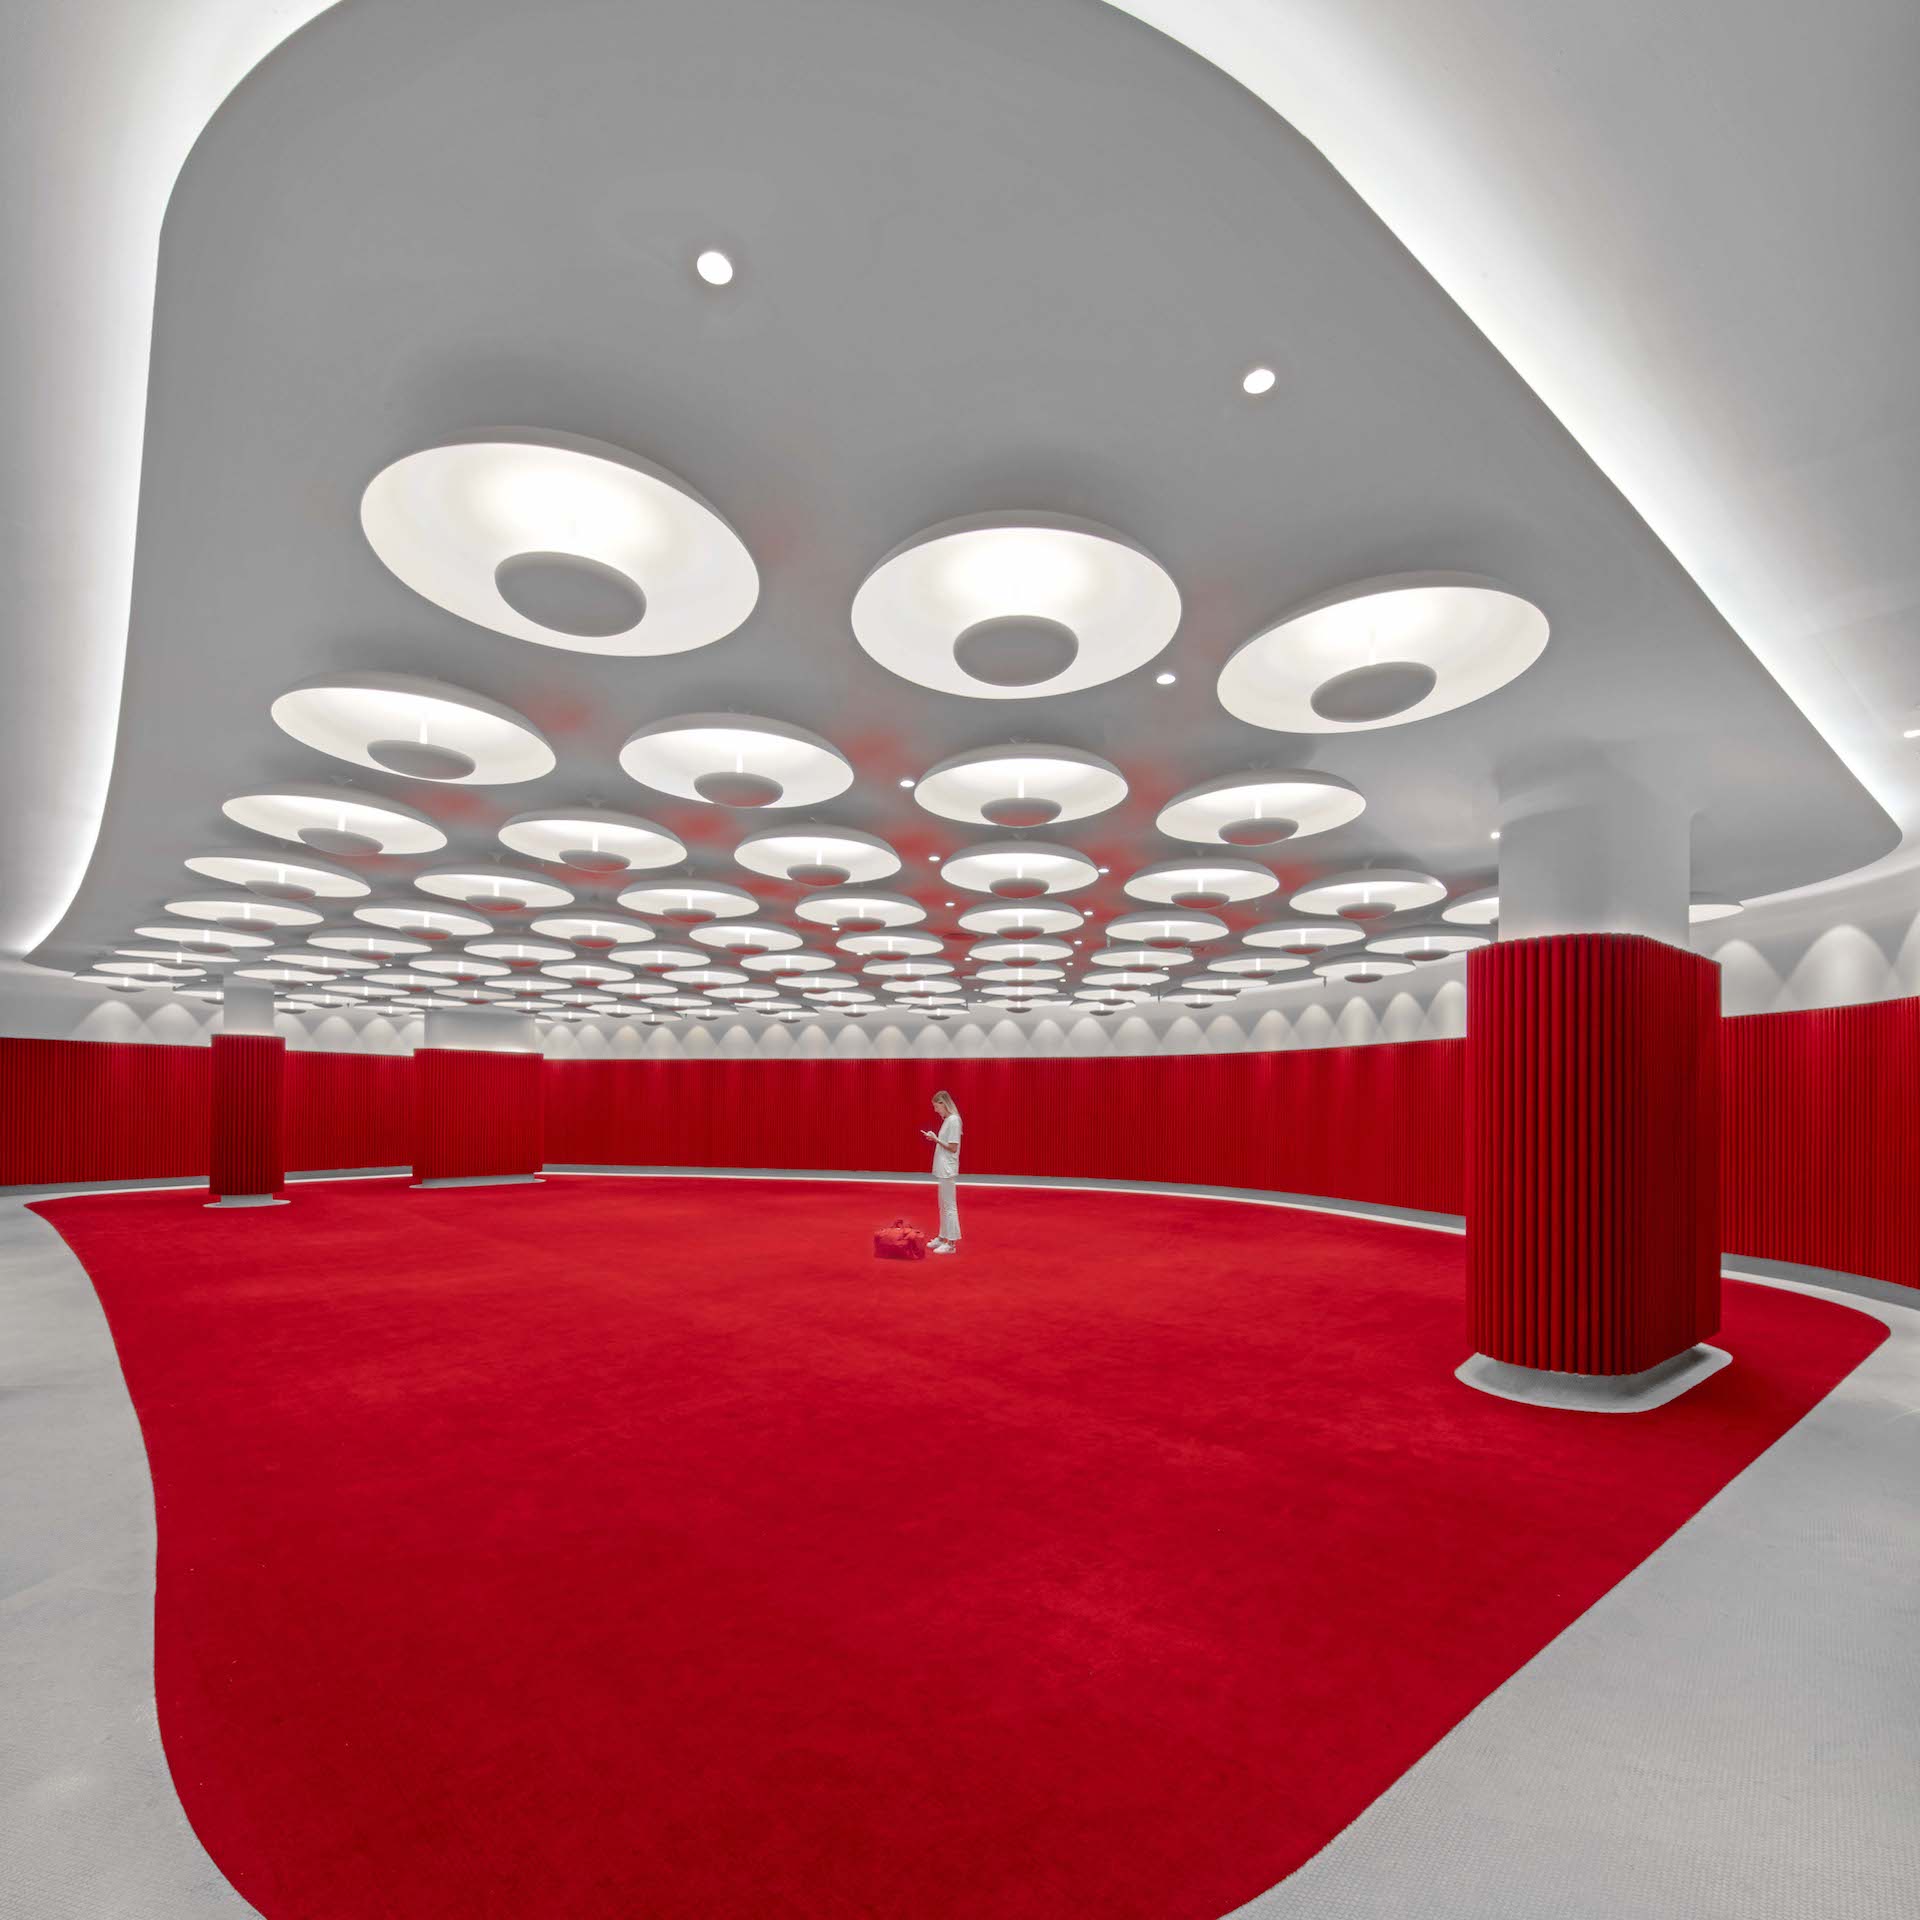 TWA Hotel event and gallery spaces in Queens; Photo by Eric Laignel; Courtesy of INC Architecture & Design